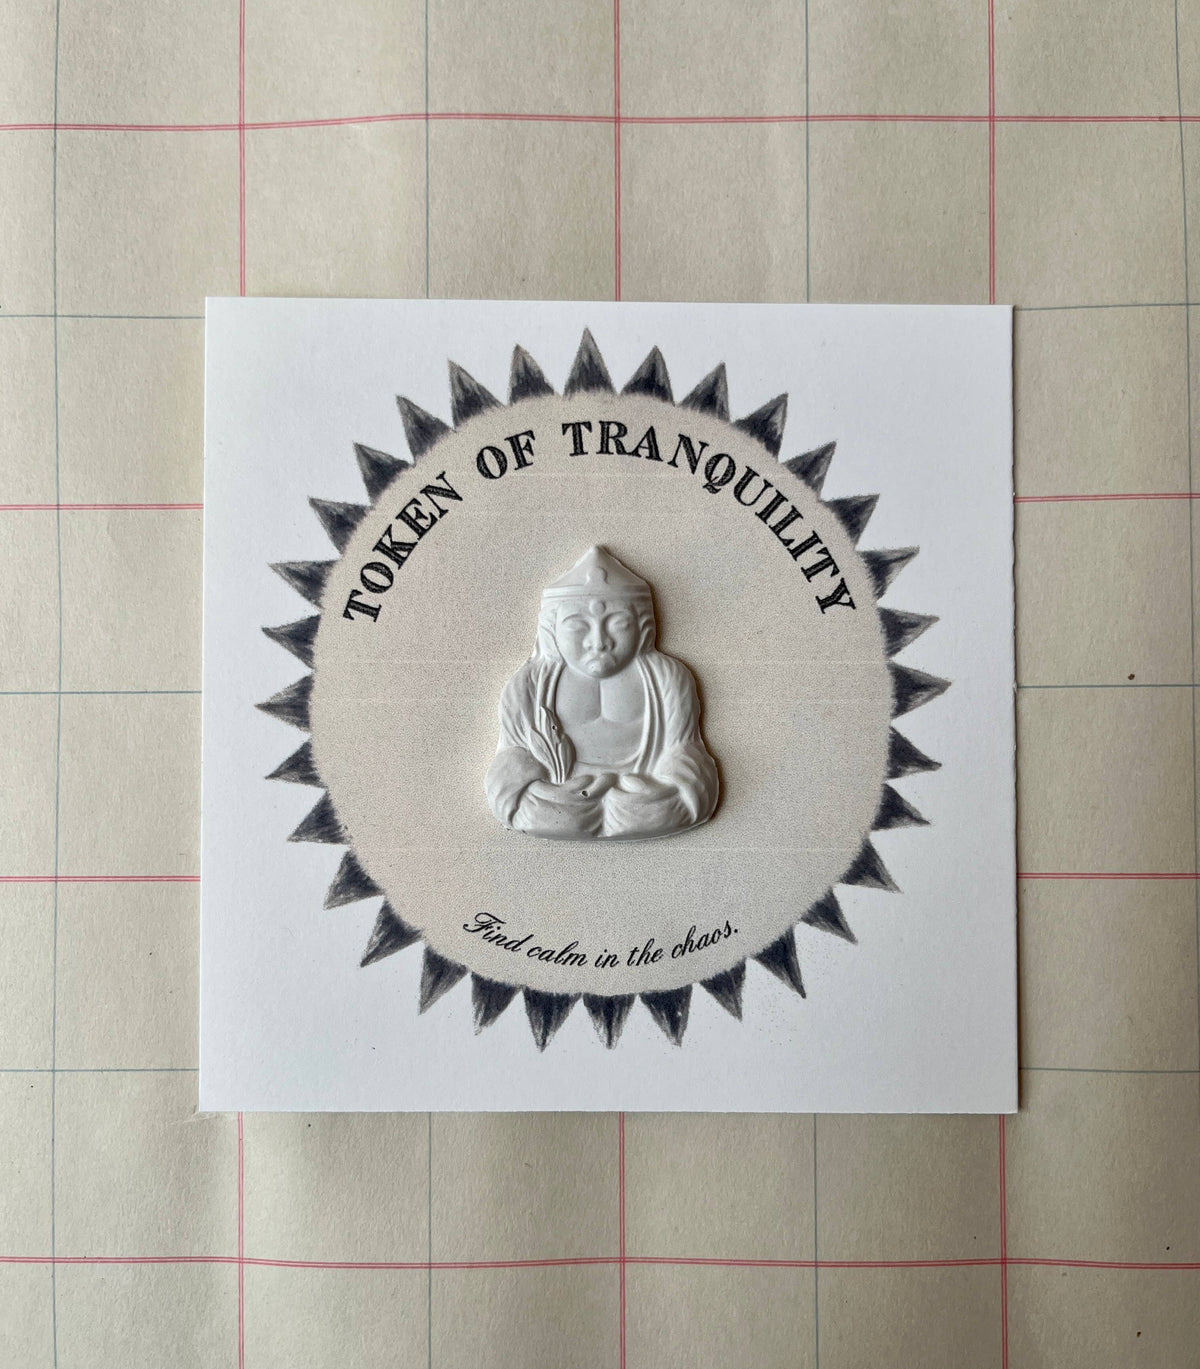 Affirmation Tokens: Protection